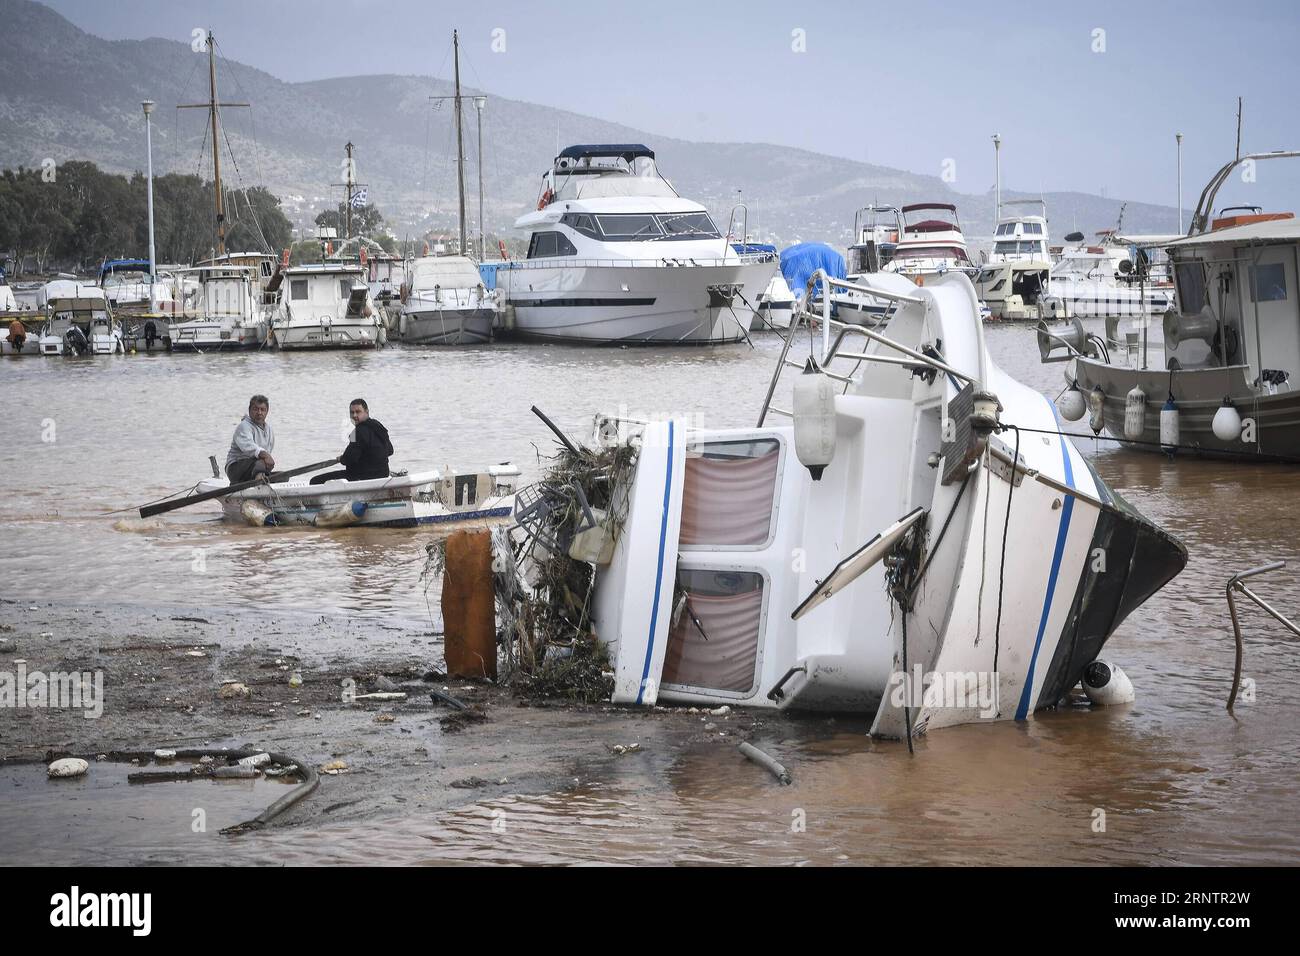 (171115) -- ATHENS, Nov. 15, 2017 -- Locals watch an inverted boat following a heavy rainfall in Mandra, about 20 kilometers west of Athens, capital of Greece, on Nov. 15, 2017. The strong torrential downpour in the municipalities of Mandra, Nea Peramos and Megara, west of the Greek capital, has claimed 15 lives, according to the latest official count by the Health Ministry. ) GREECE-MANDRA-FLOOD MariosxLolos PUBLICATIONxNOTxINxCHN Stock Photo